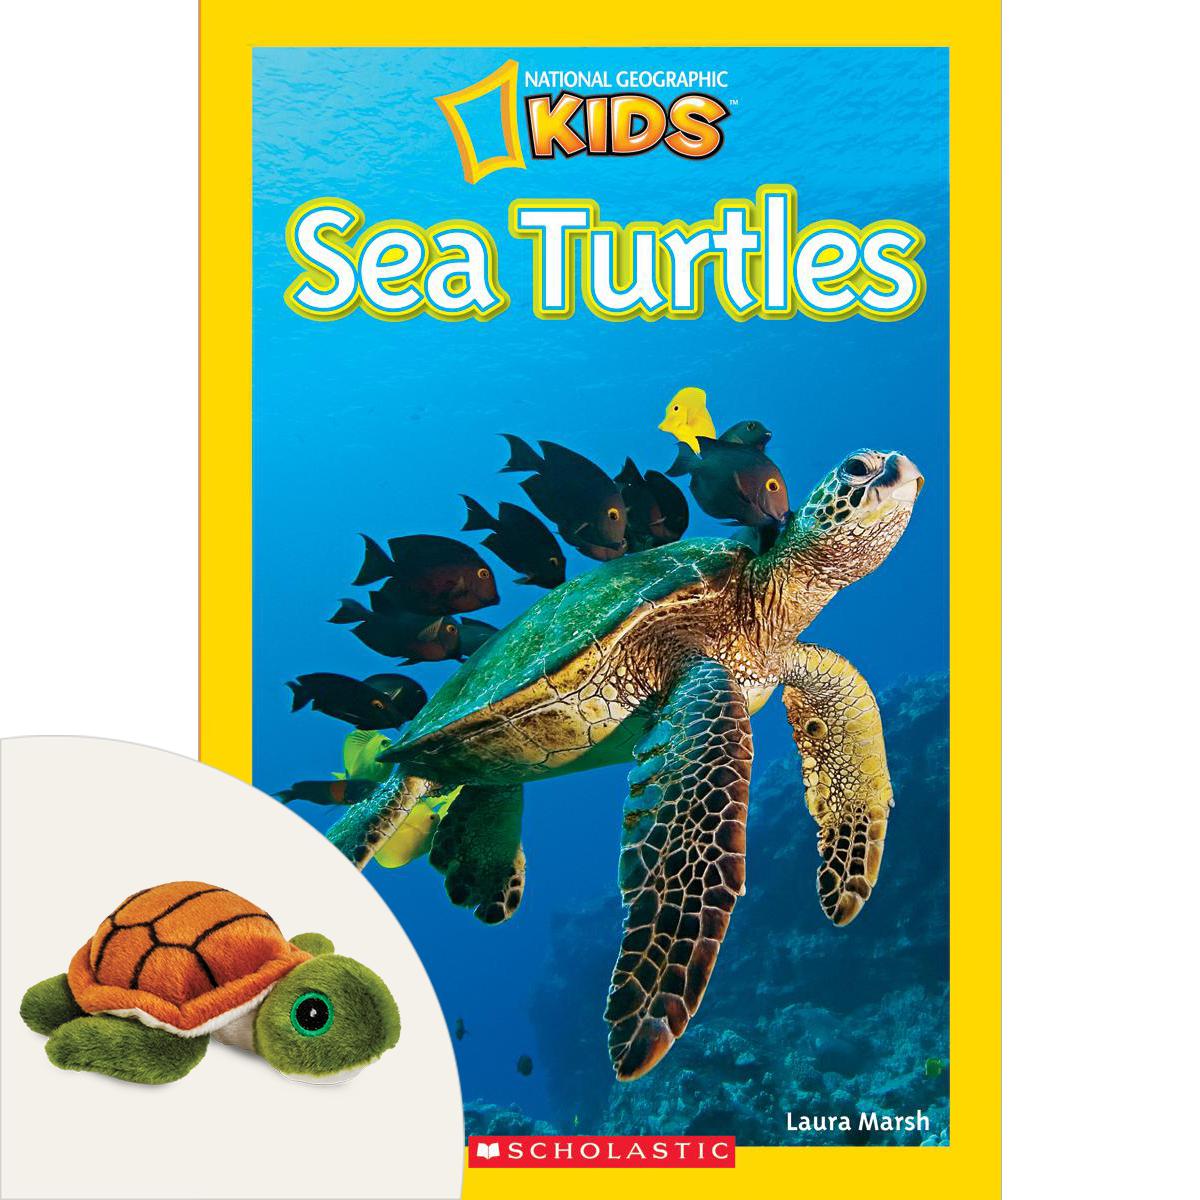  National Geographic Kids?: Sea Turtle Pack 